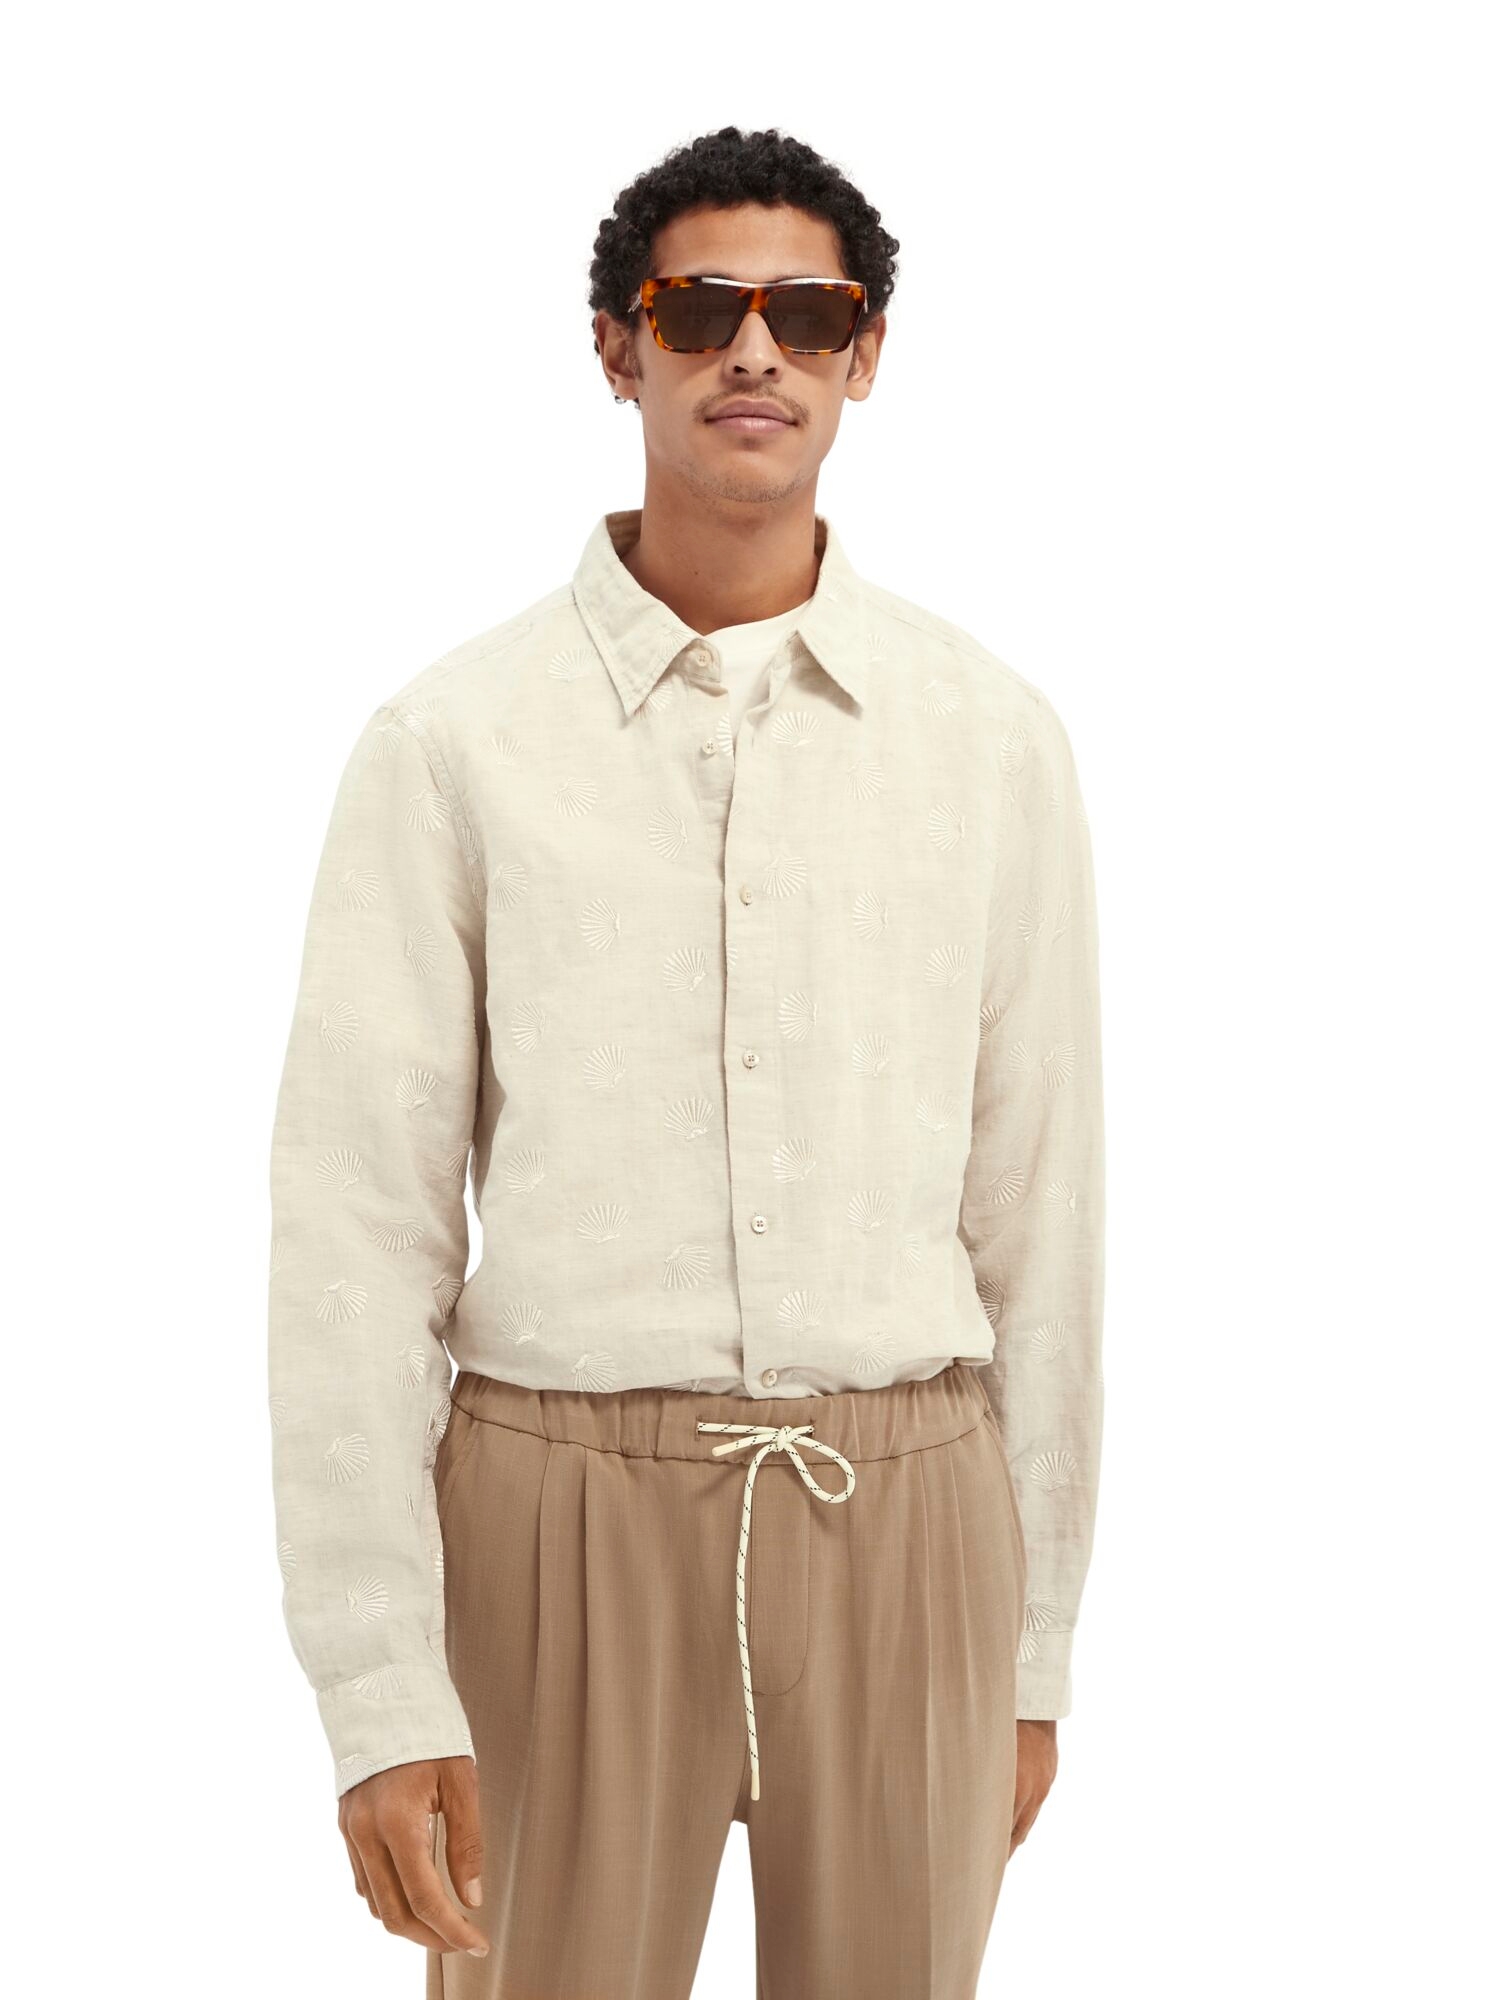 Scotch & Soda | RELAXED FIT- Embroidered organic cotton blend shirt 6